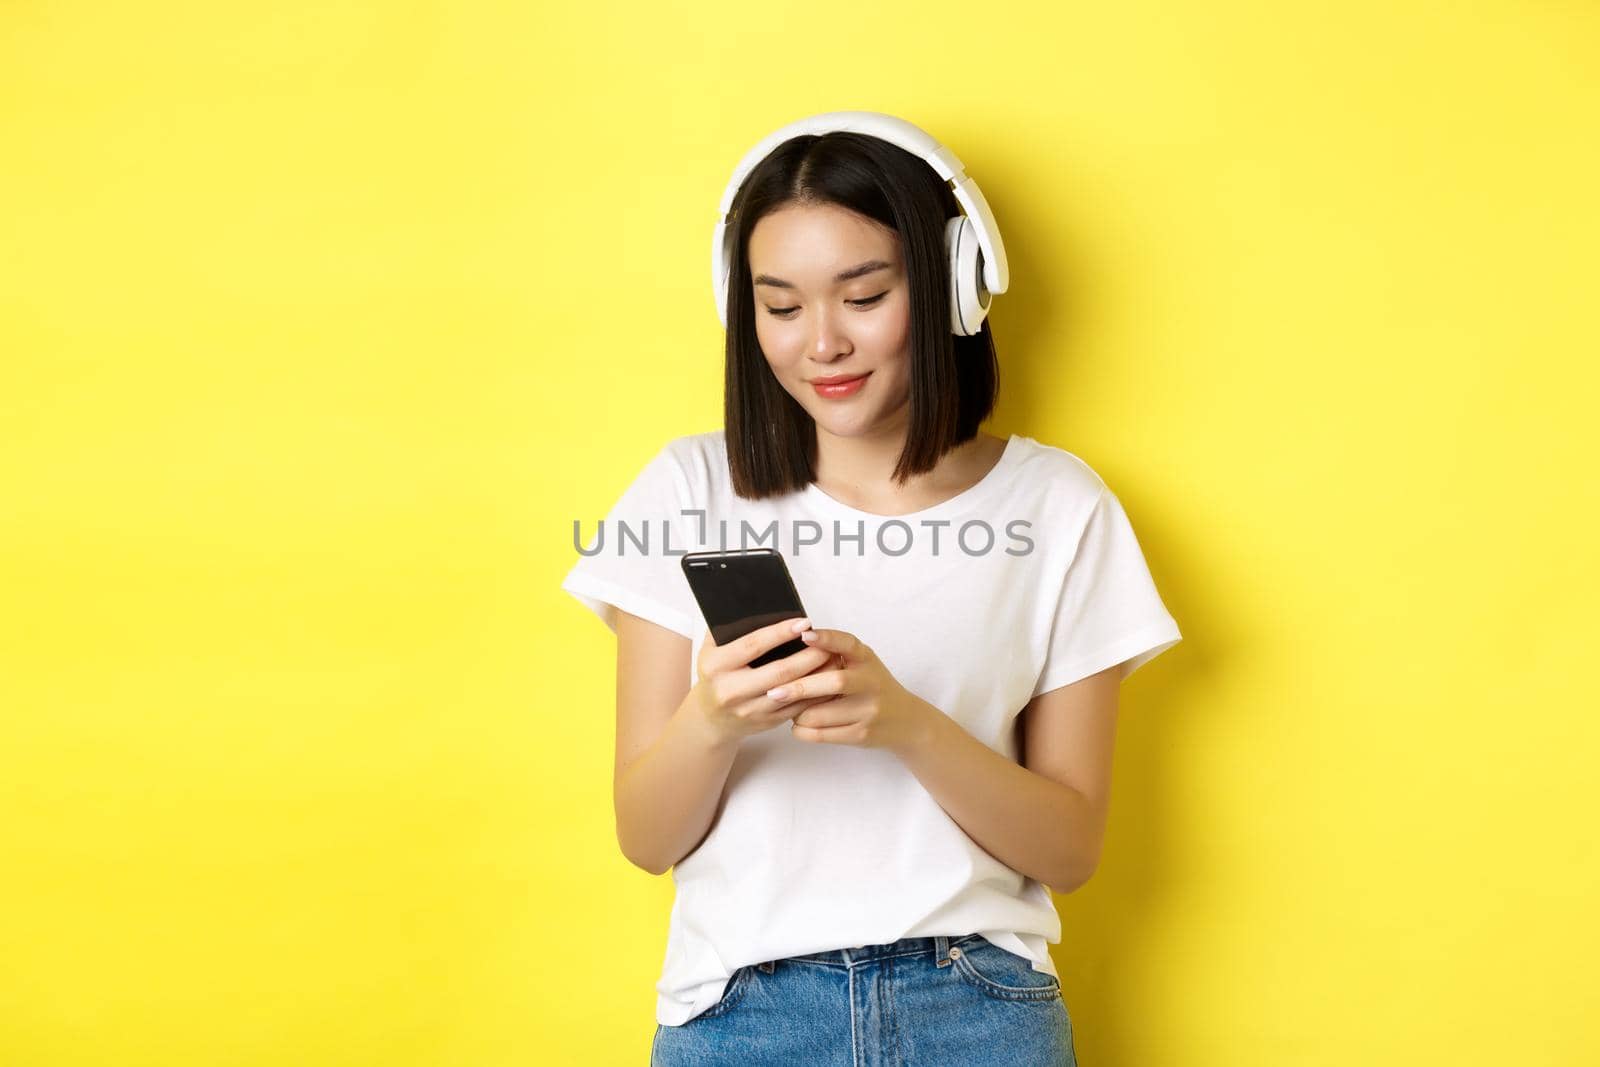 Modern asian girl listening music in wireless headphones, reading smartphone screen and smiling, standing in white t-shirt over yellow background.